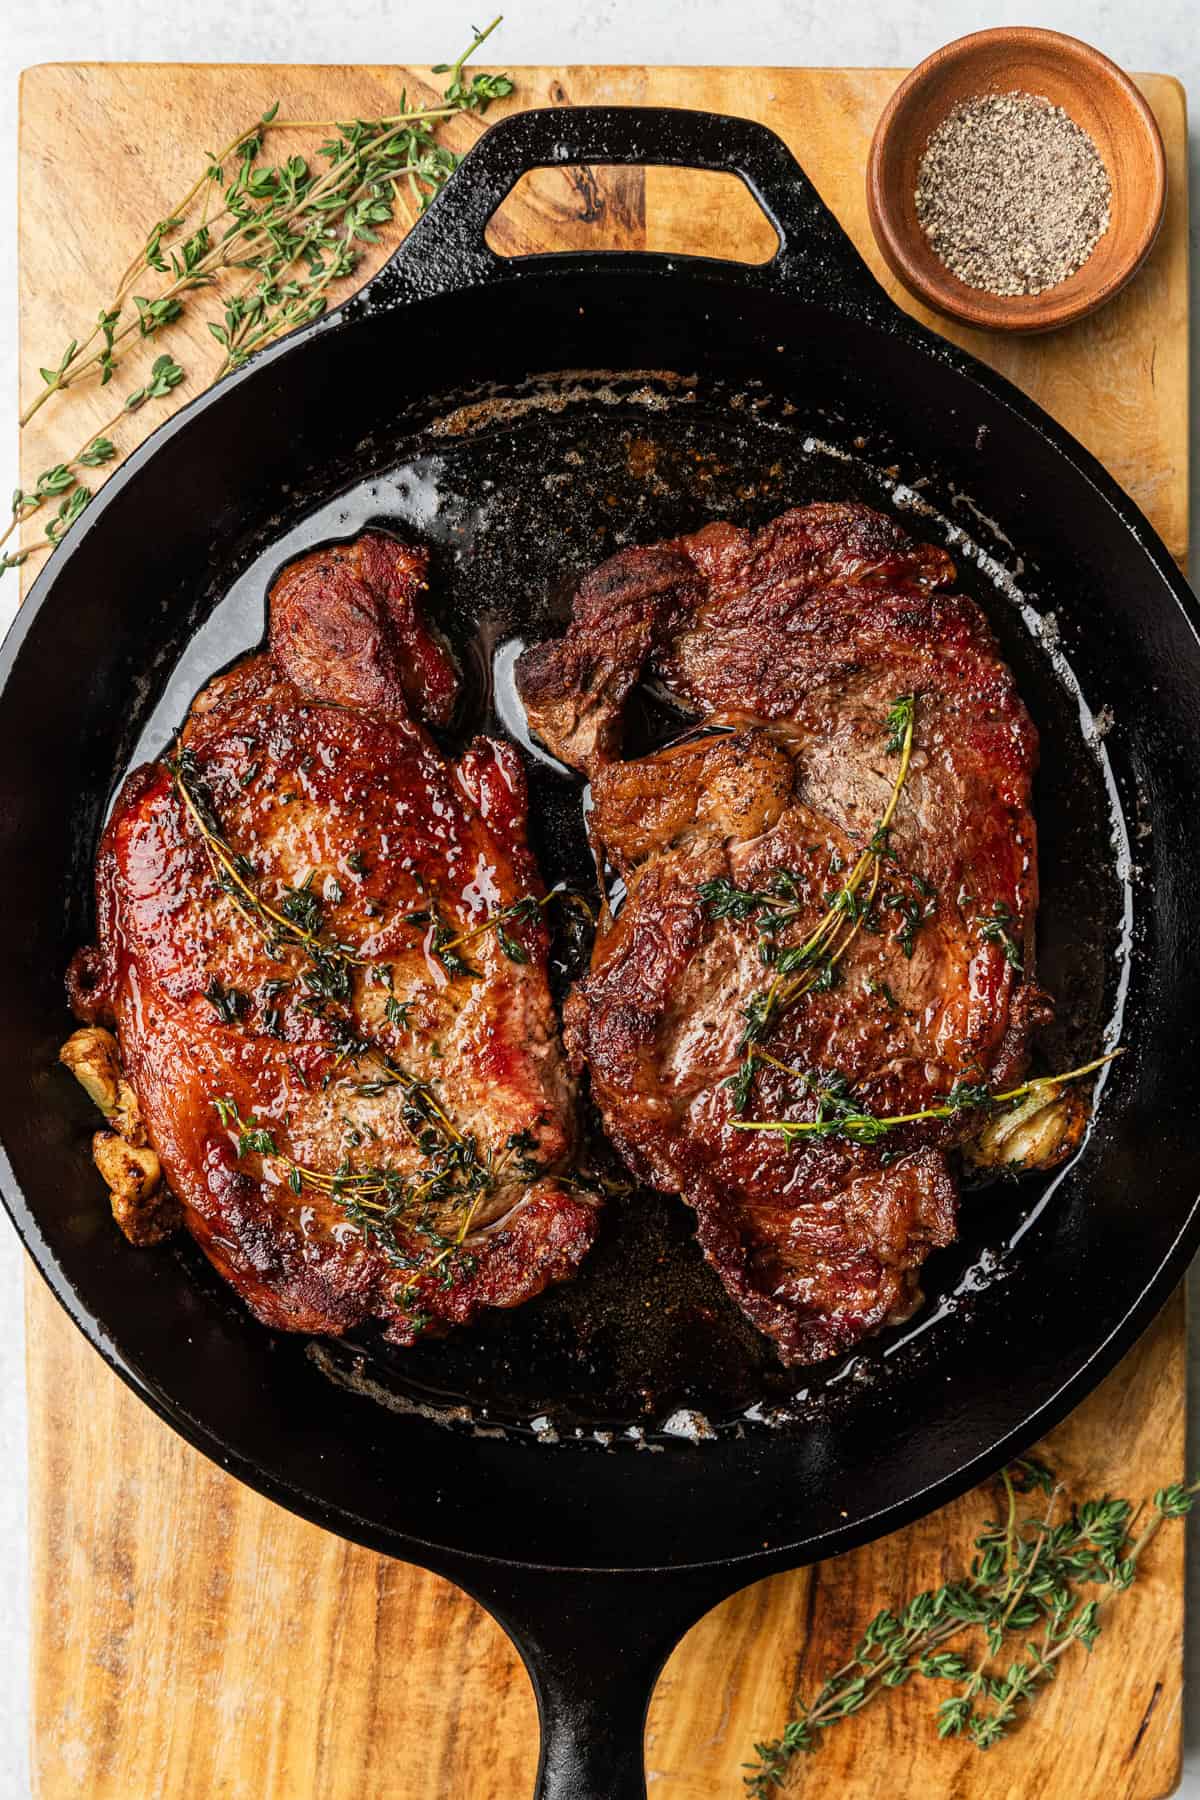 ribeye steaks cooked in a cast iron skillet.